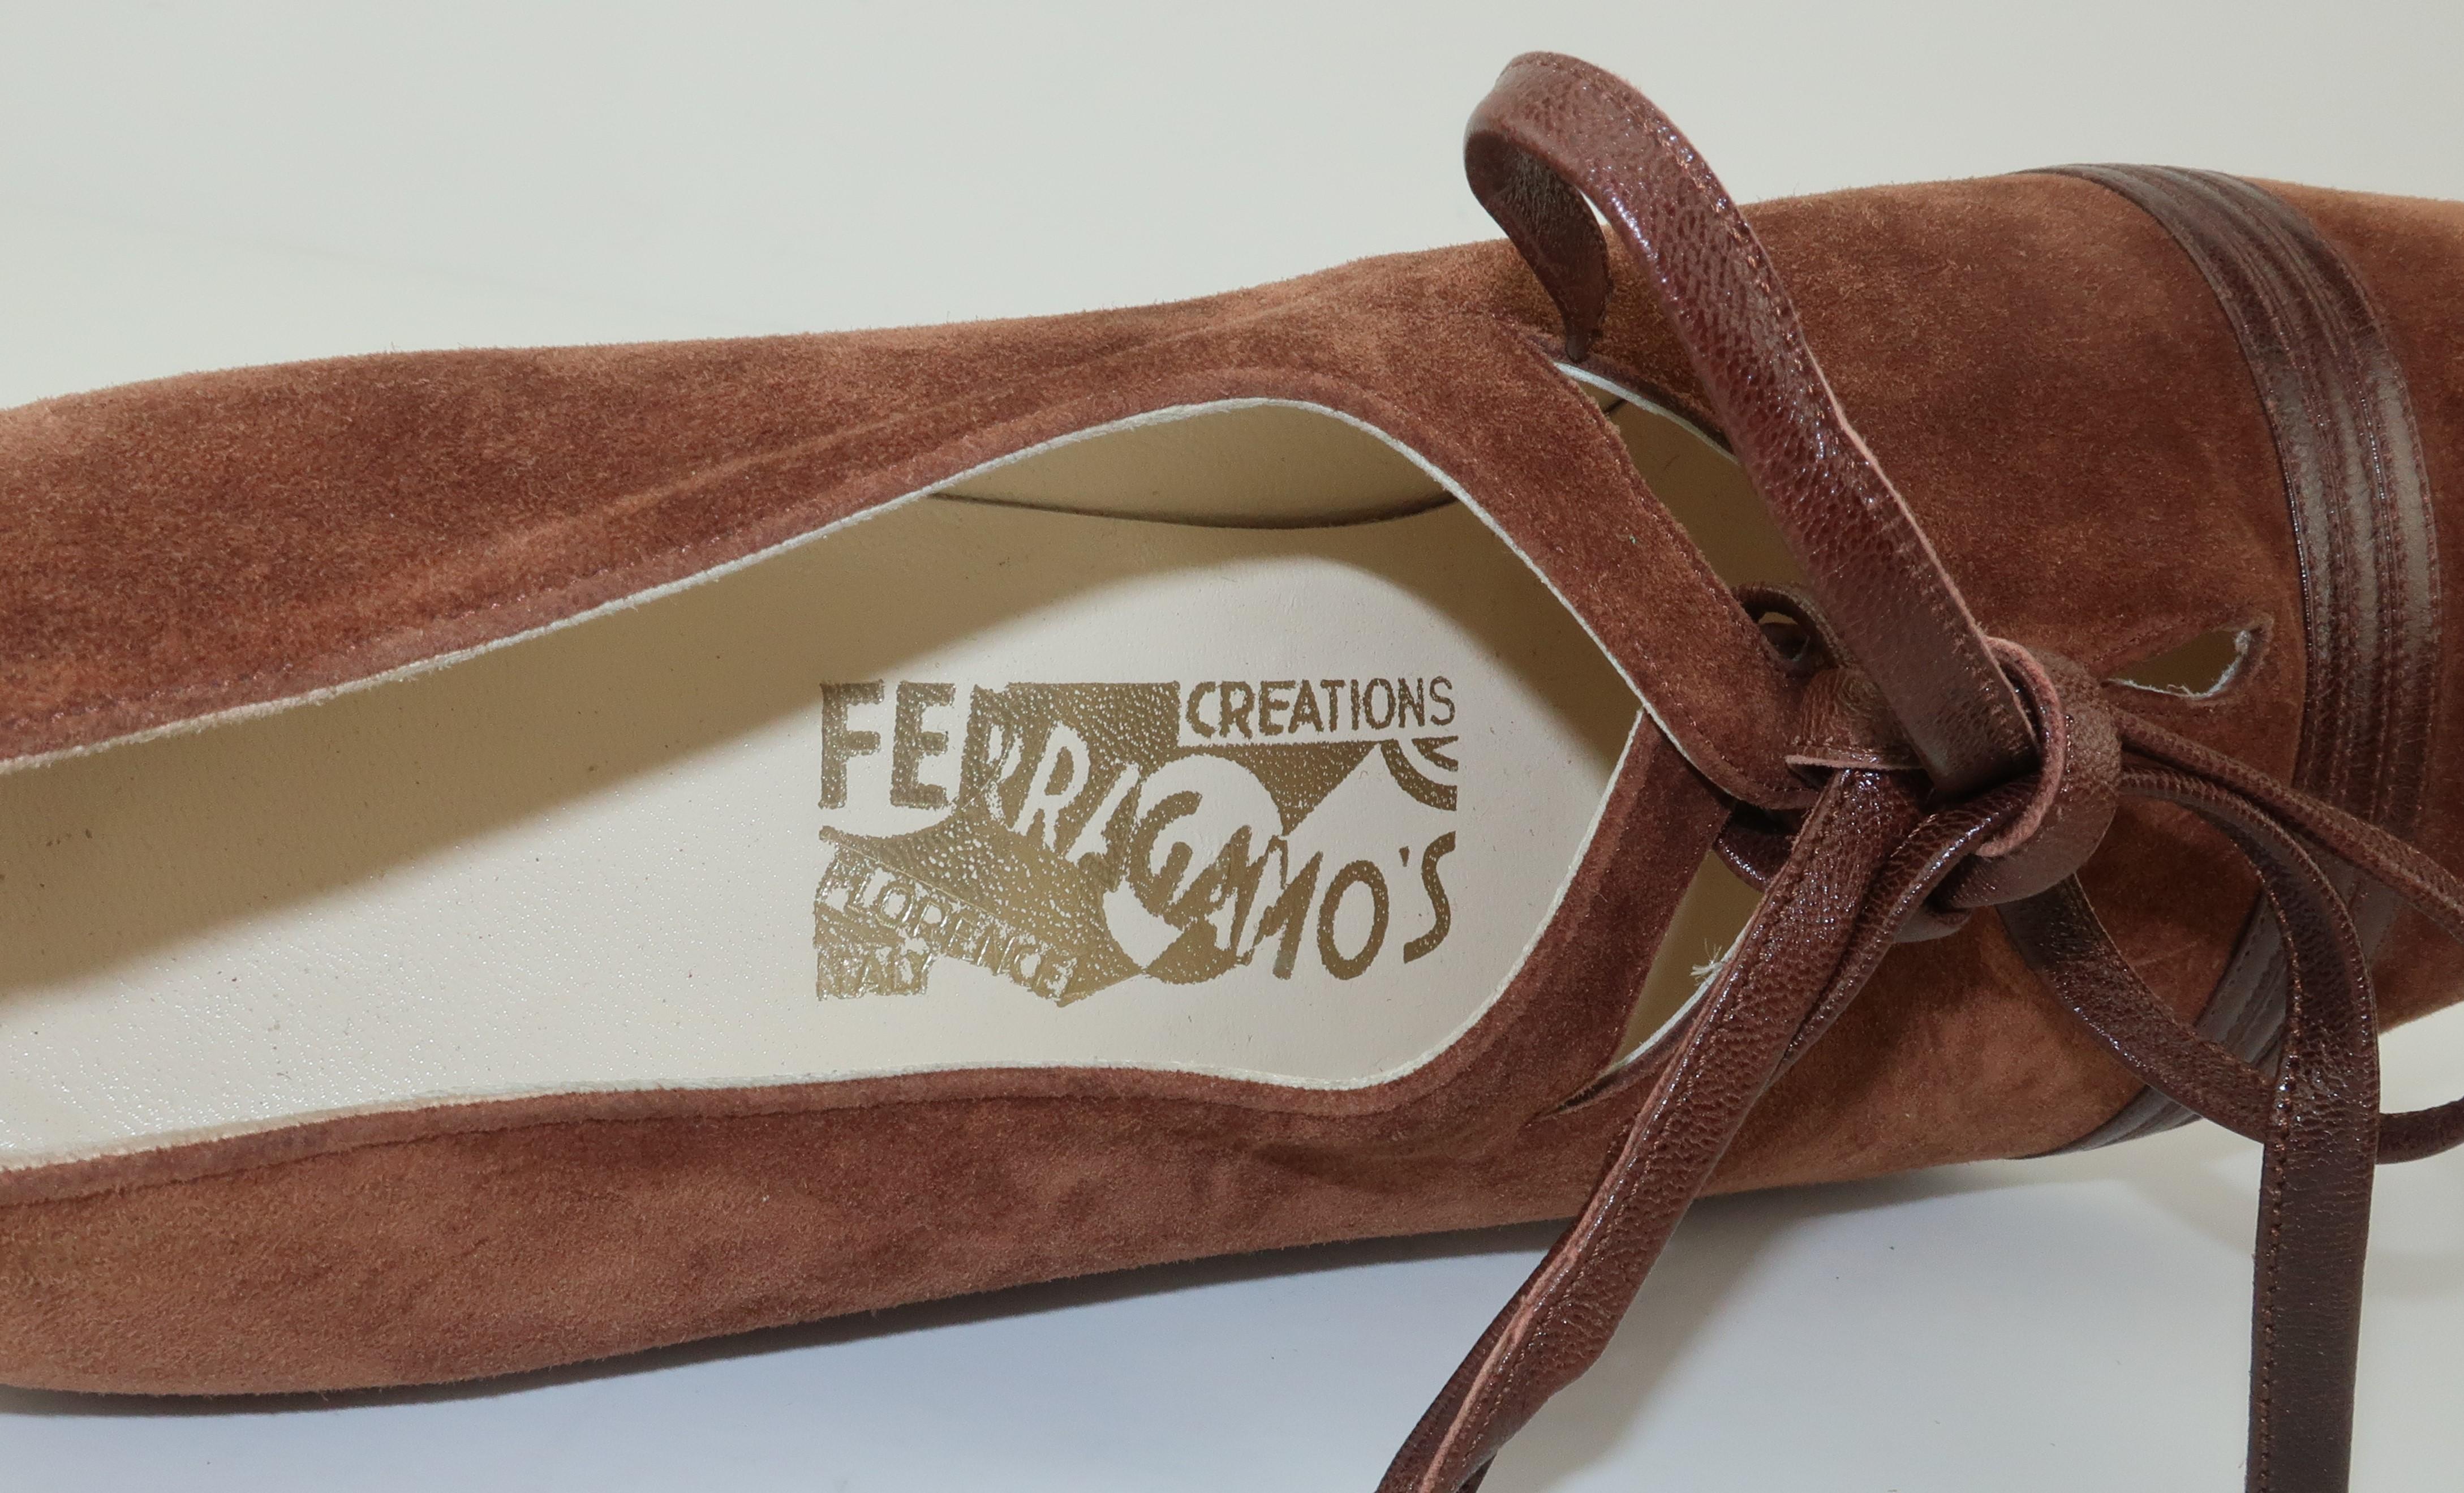 Ferragamo Creations Limited Edition 1940's Style Brown Suede Wedge Shoes Sz 8 2